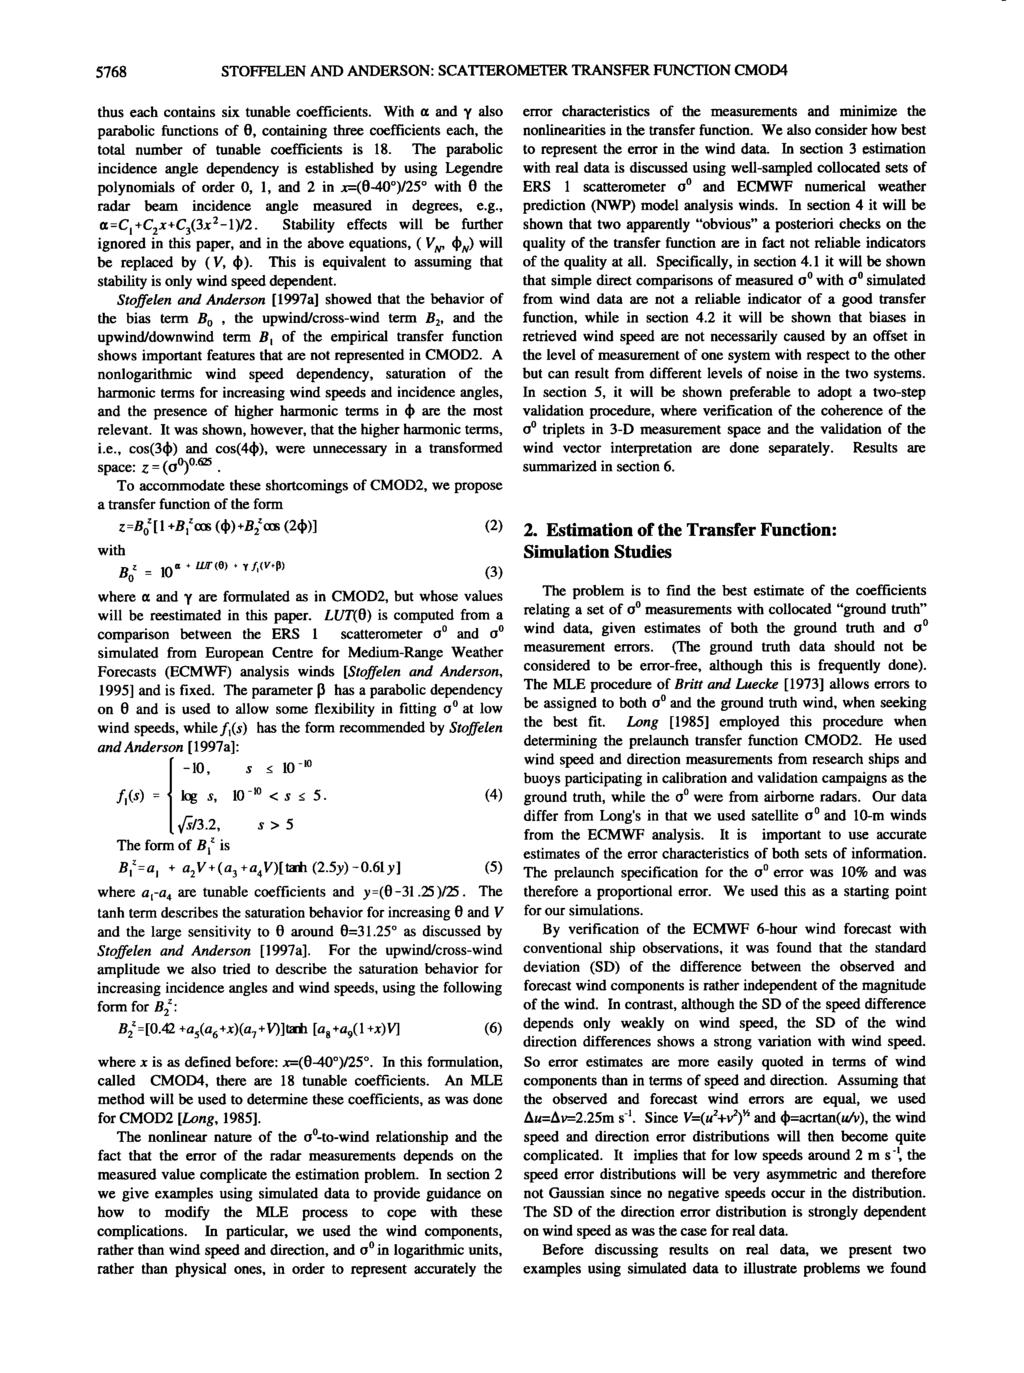 5768 STOFFELEN AND ANDERSON: SCATTEROMETER TRANSFER FUNCTION CMOD4 thus each contains six tunable coefficients.